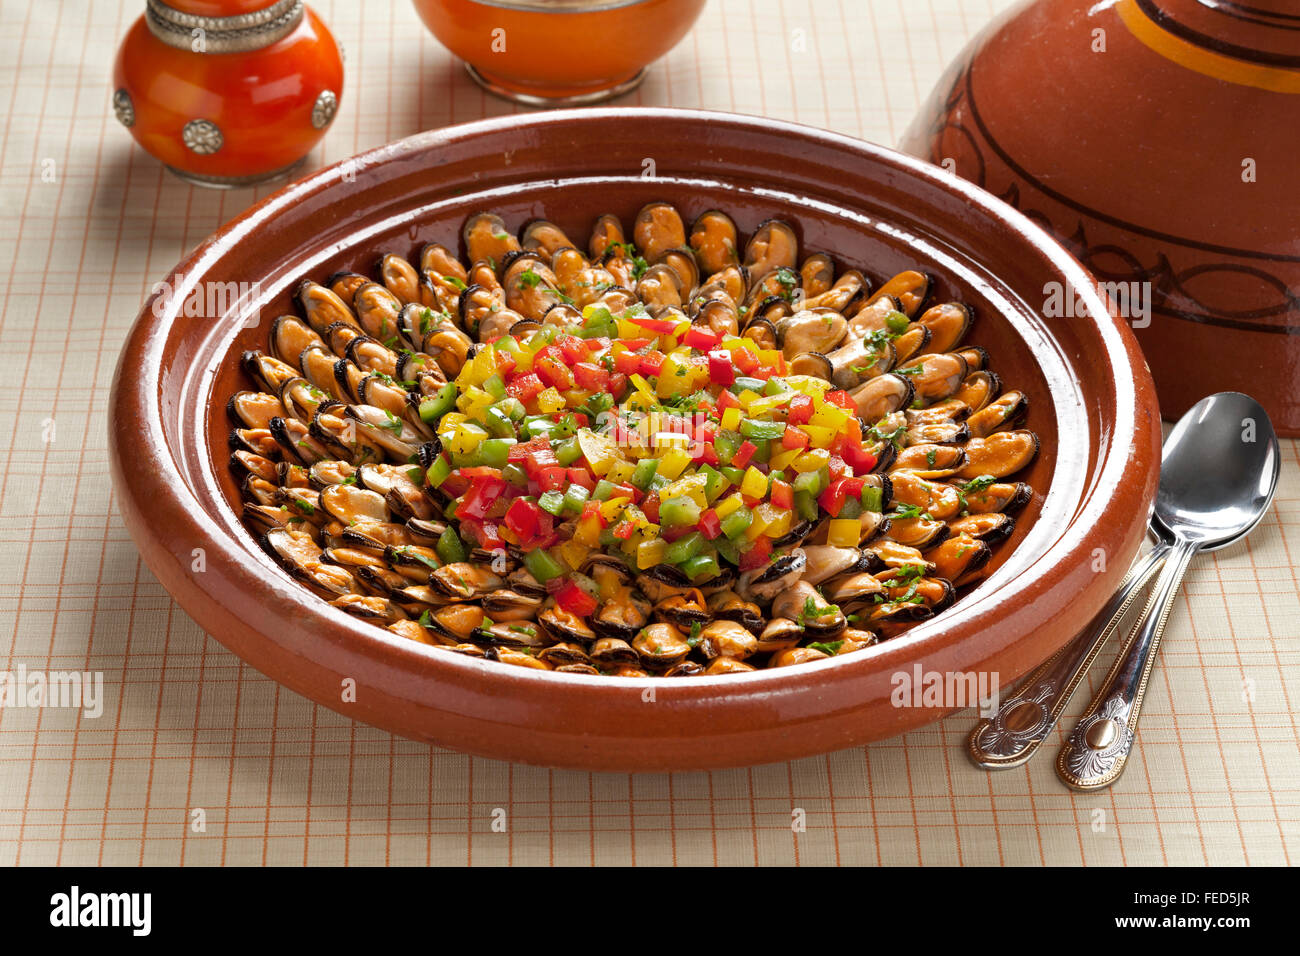 Moroccan mussel dish from Marakech Stock Photo